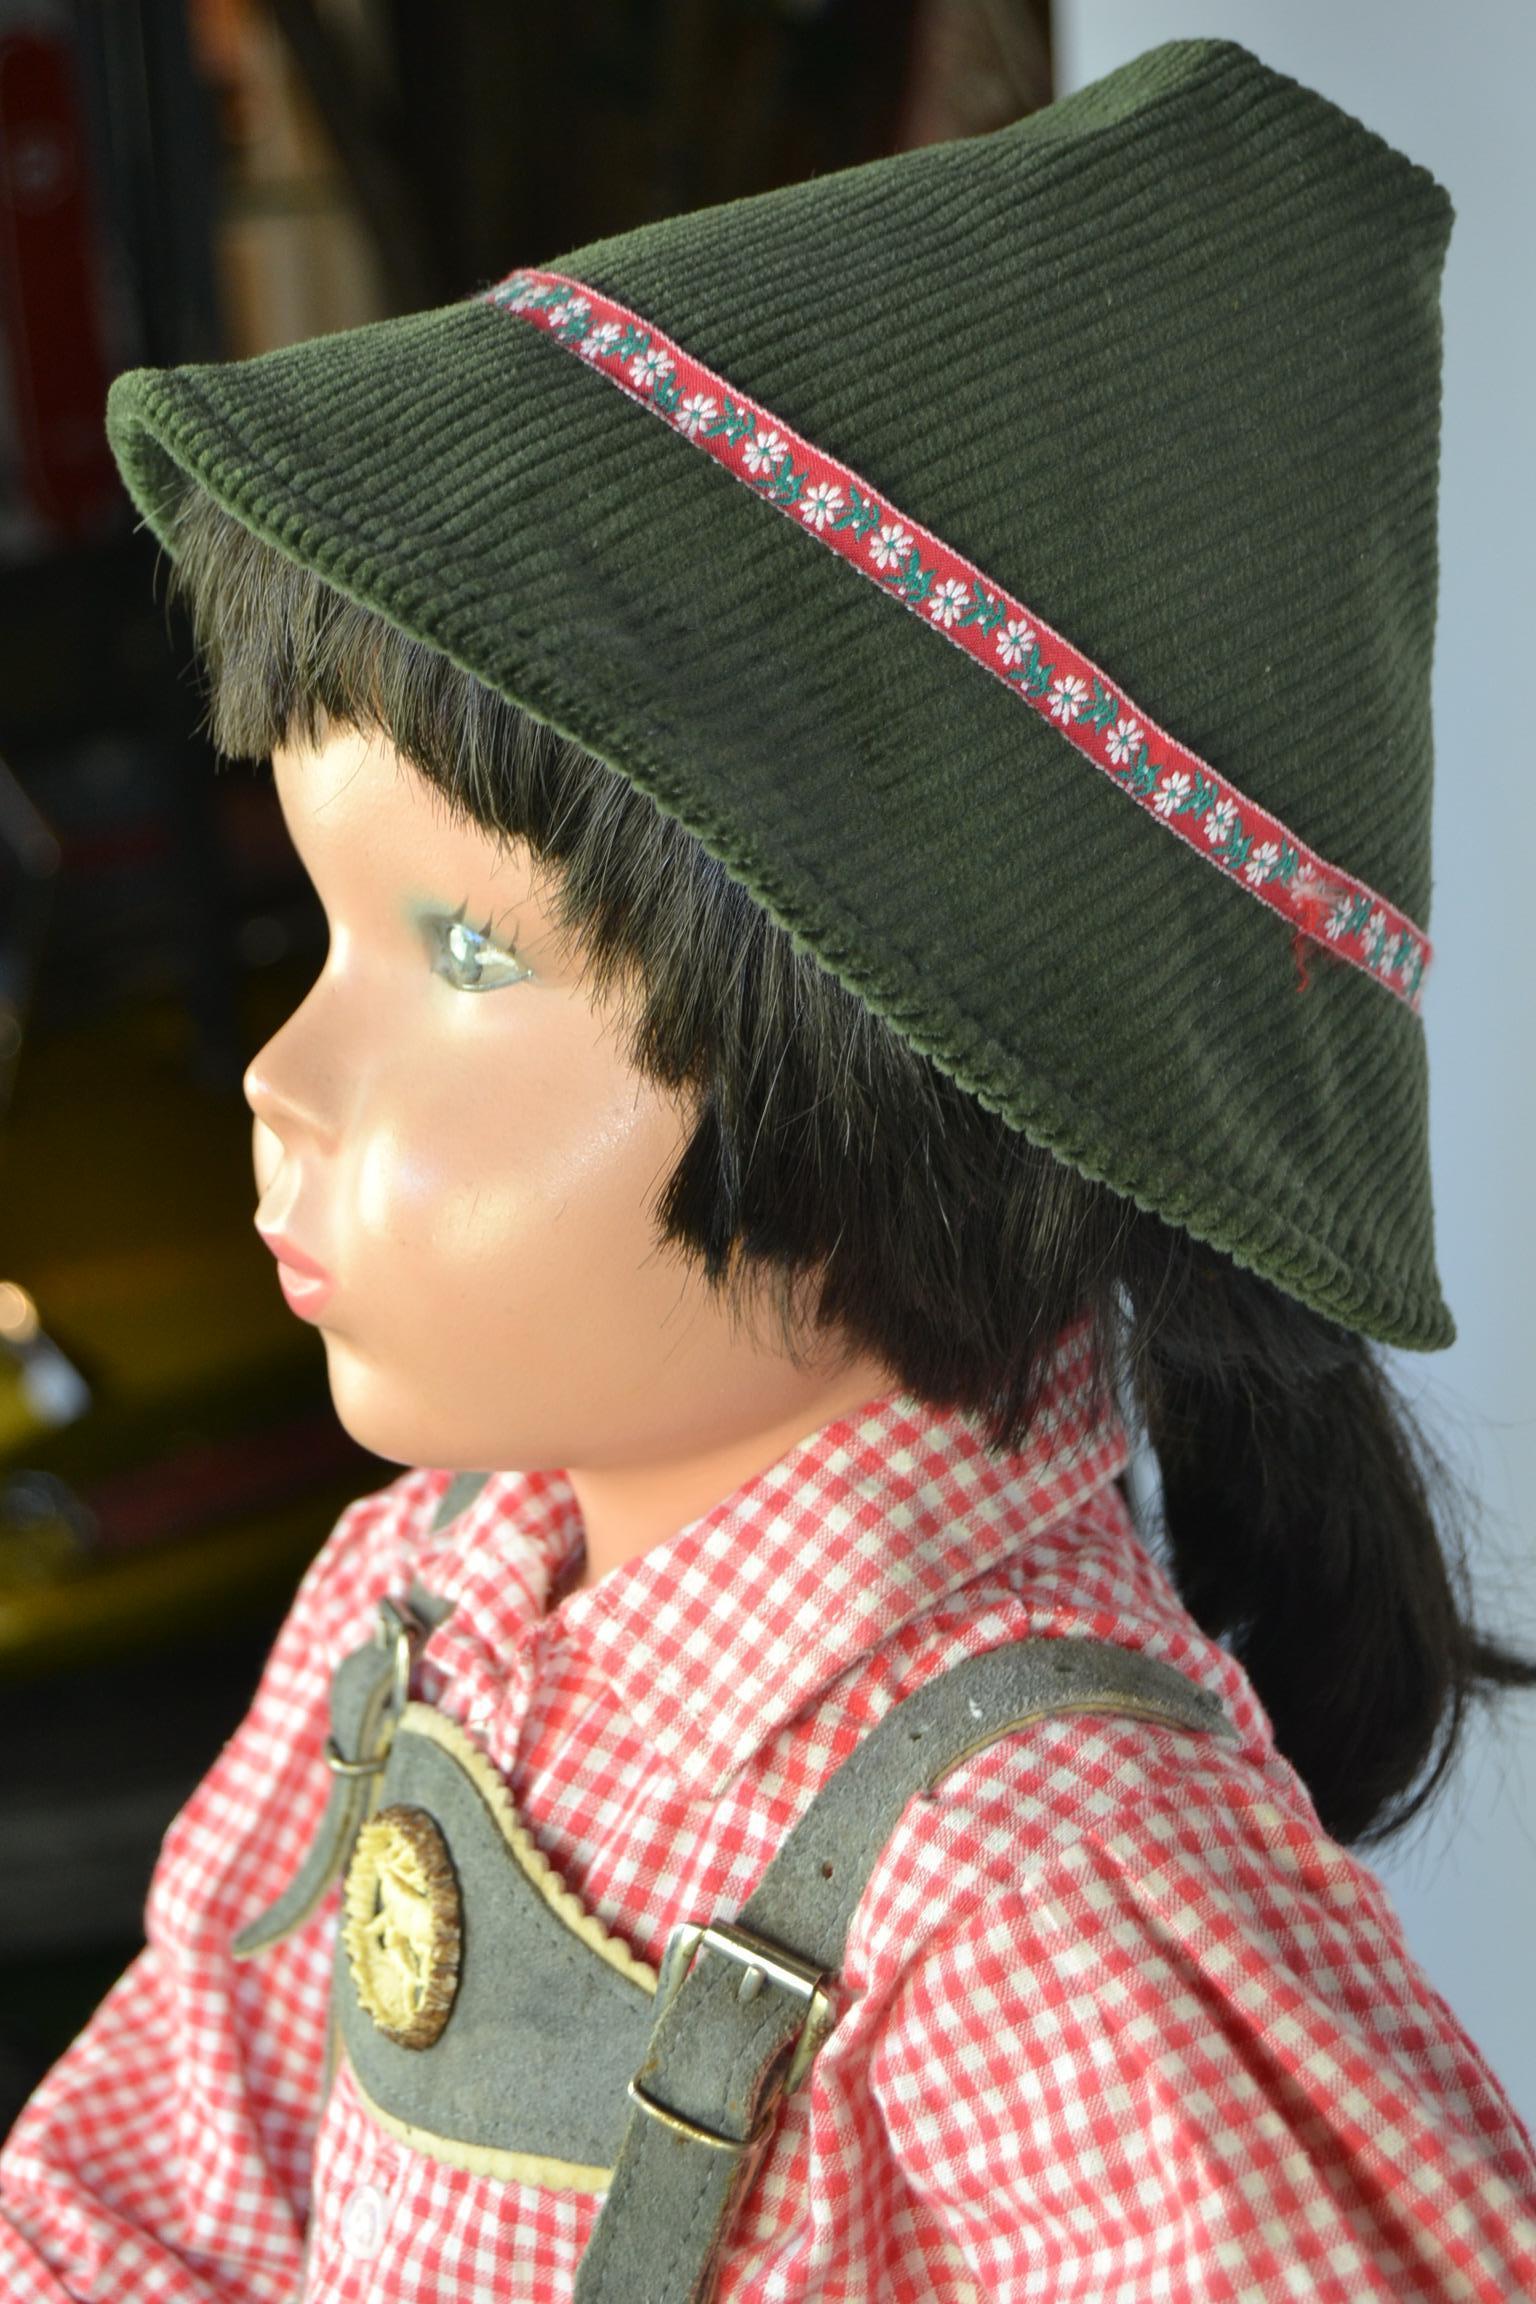 Acrylic 1950s Store Display Mannequin Child, Tyrol Clothing, Kathe Kruse Style